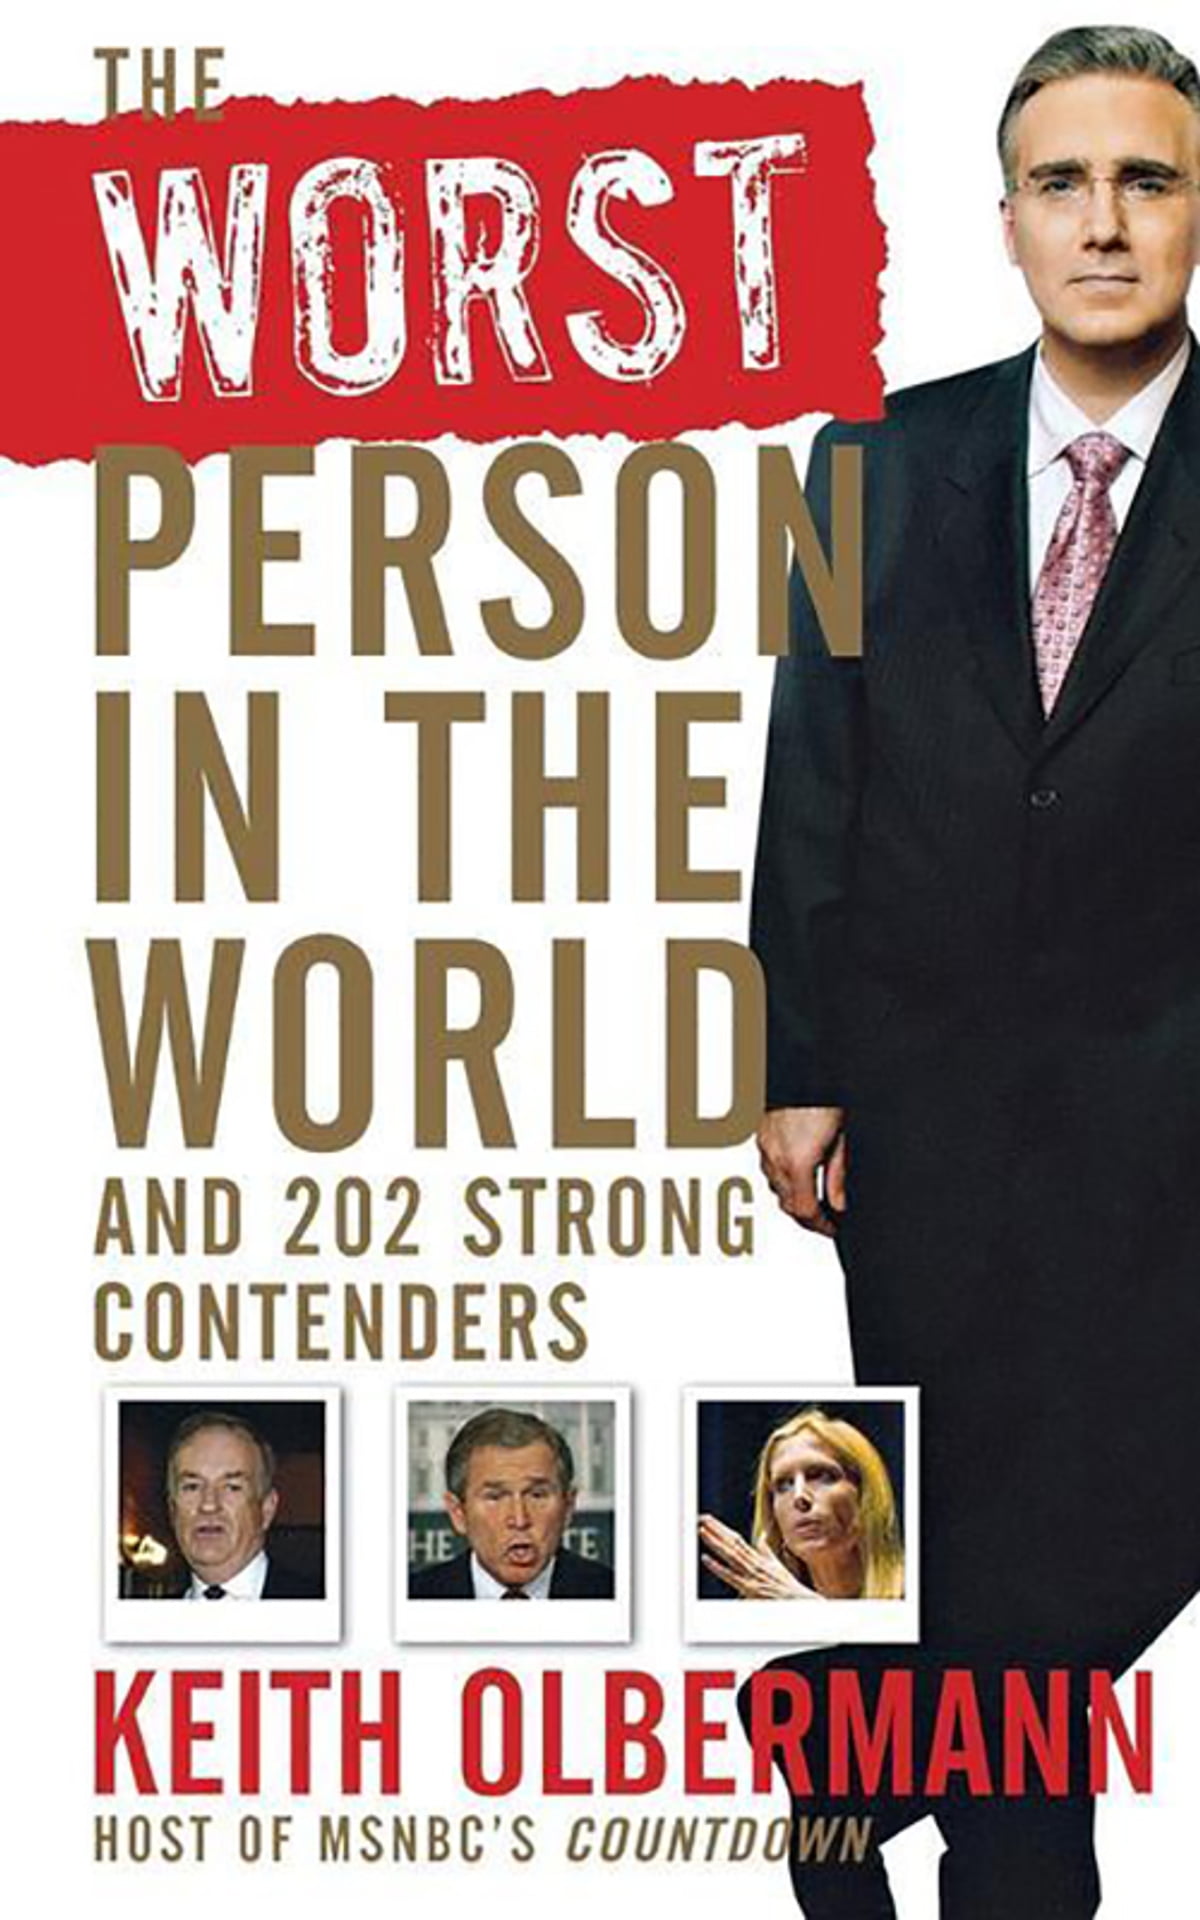 The Worst Person In the World eBook by Keith Olbermann. Rakuten Kobo United States